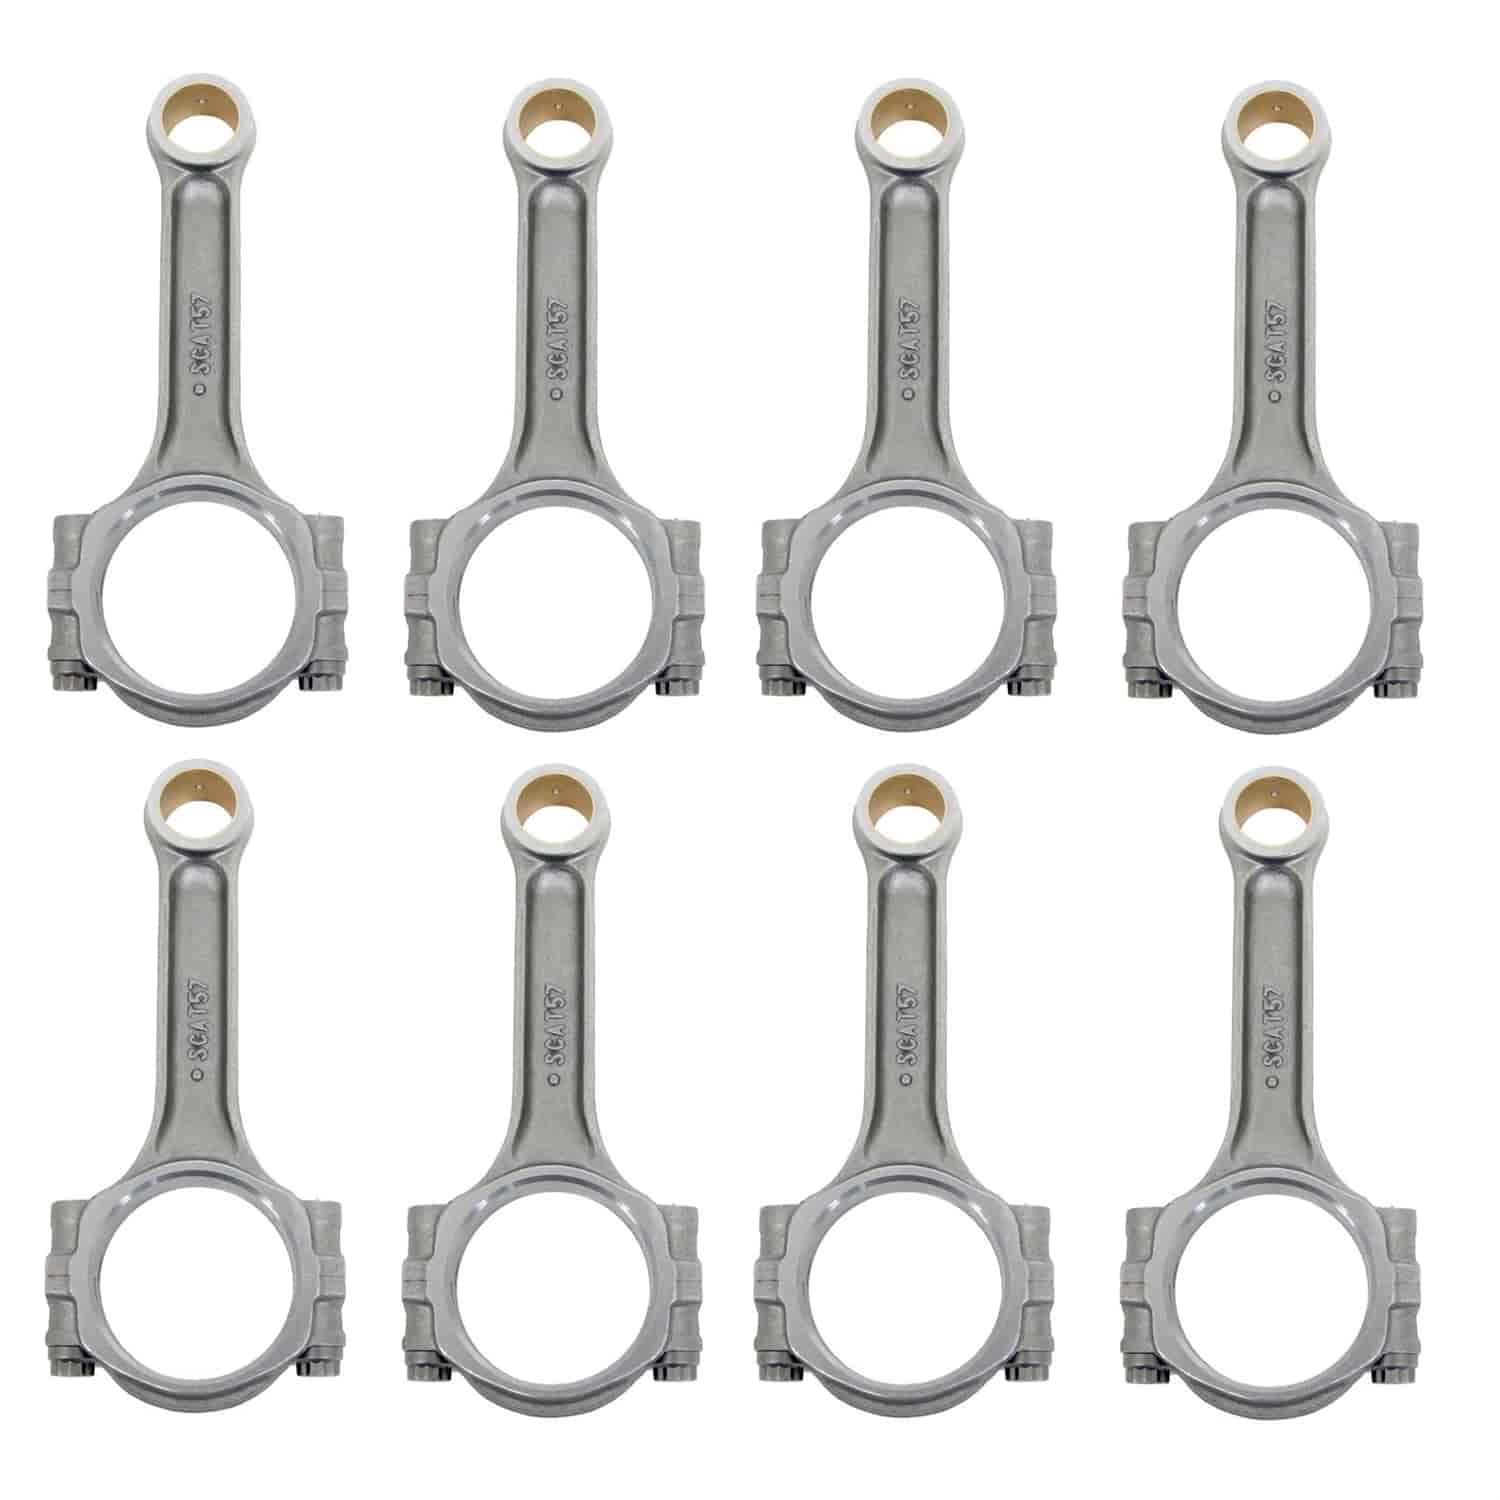 Holden Pro Series I-Beam Connecting Rods Bushed 7/16 ARP 2000 Cap Screw Bolts